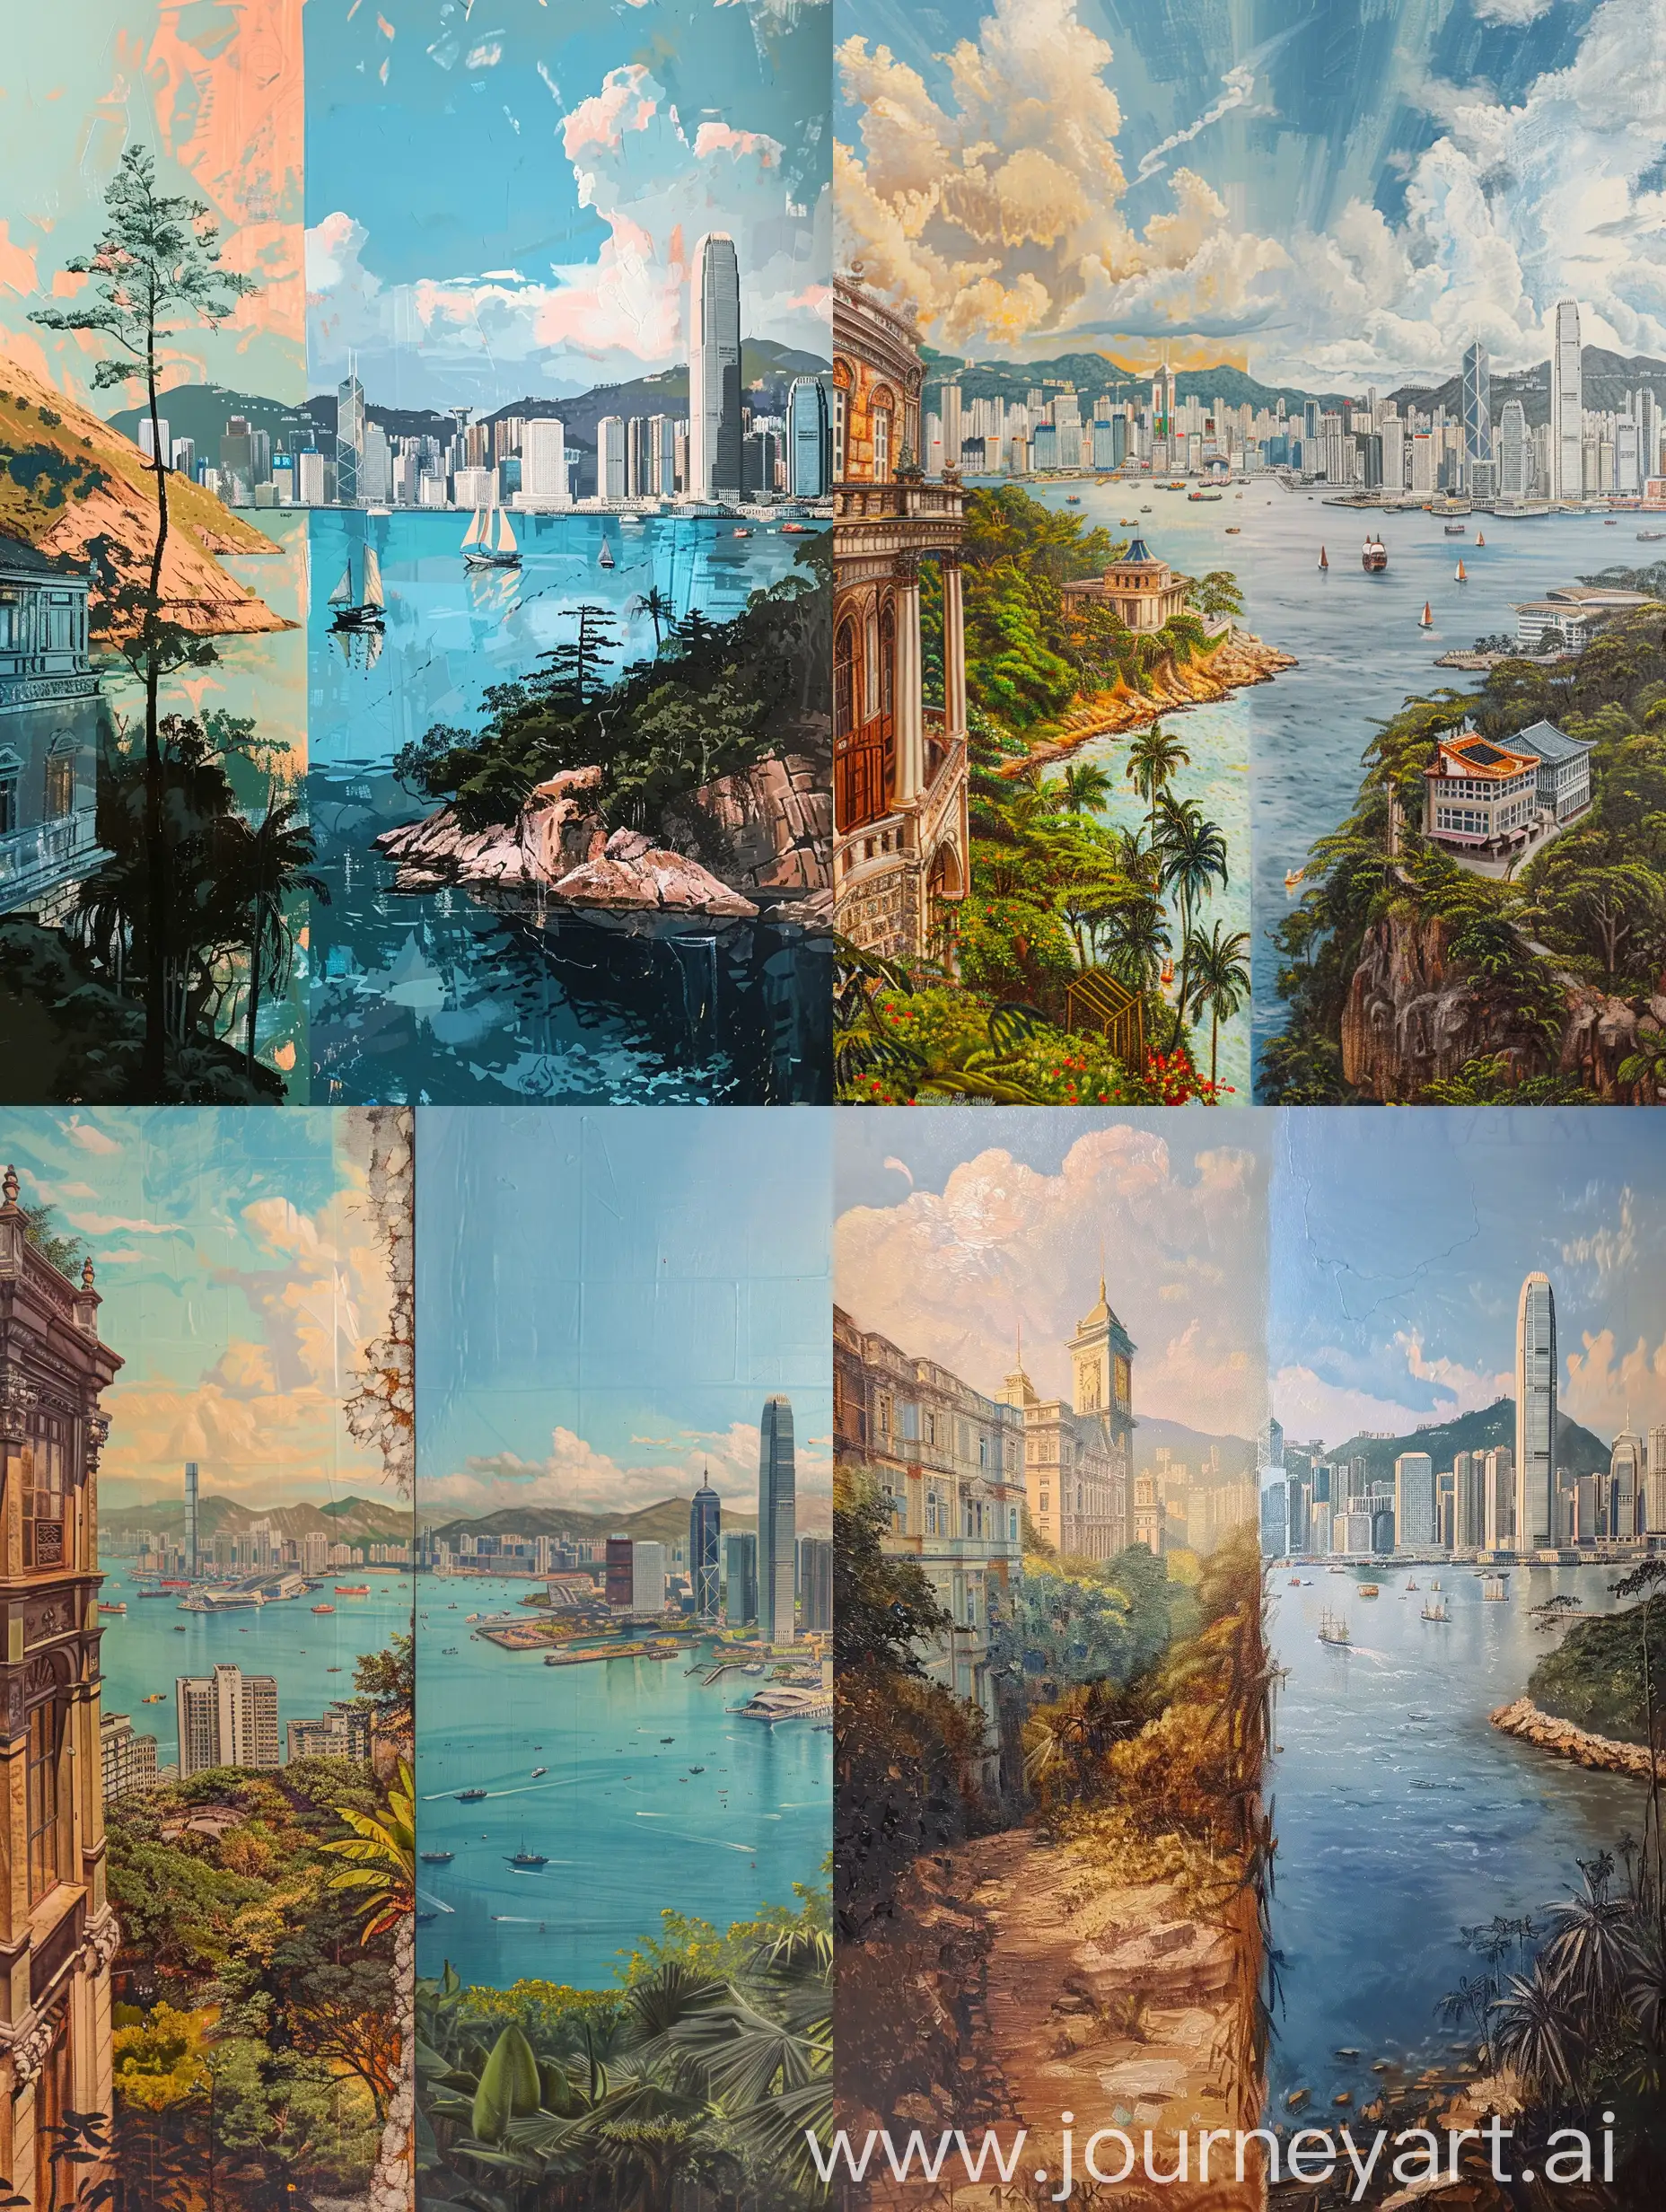 Generate an oil painting based on a landscape of the city of Hong Kong. The landscape in the artwork has a colonial style on the left and a modern Hong Kong view on the right